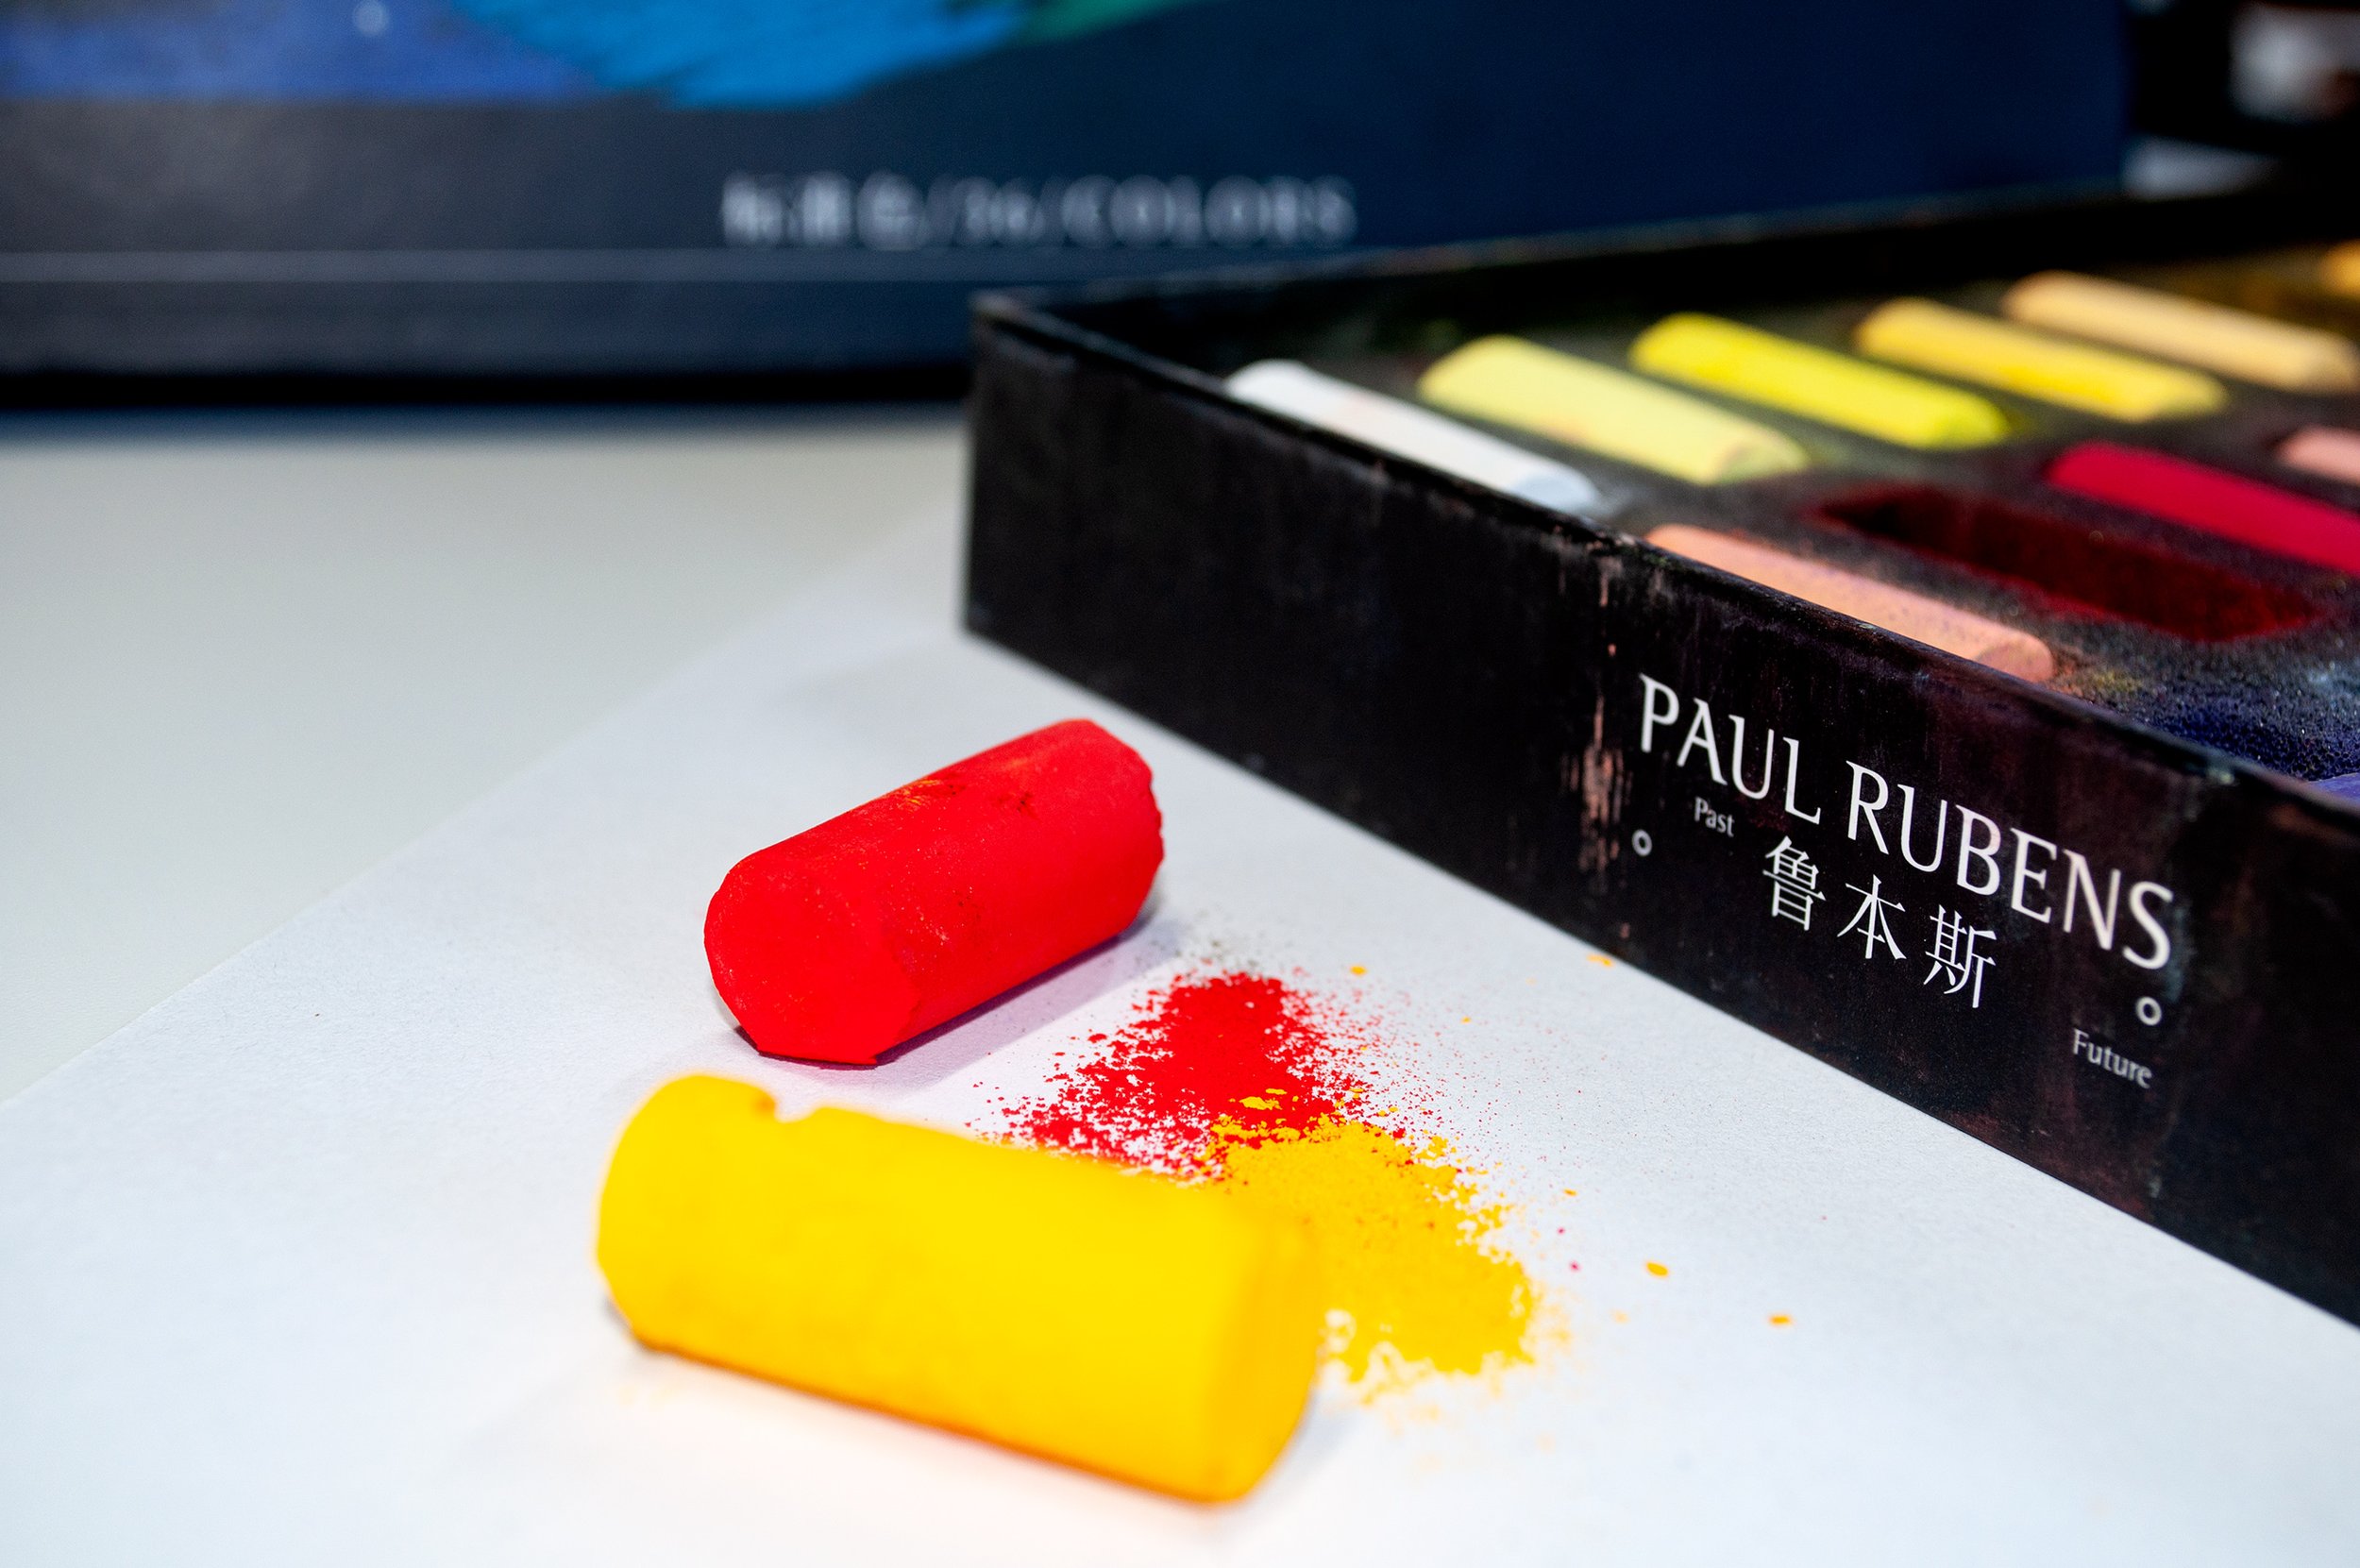 Paul Rubens 48 Oil Pastels Review - The Artistic Gnome Blog